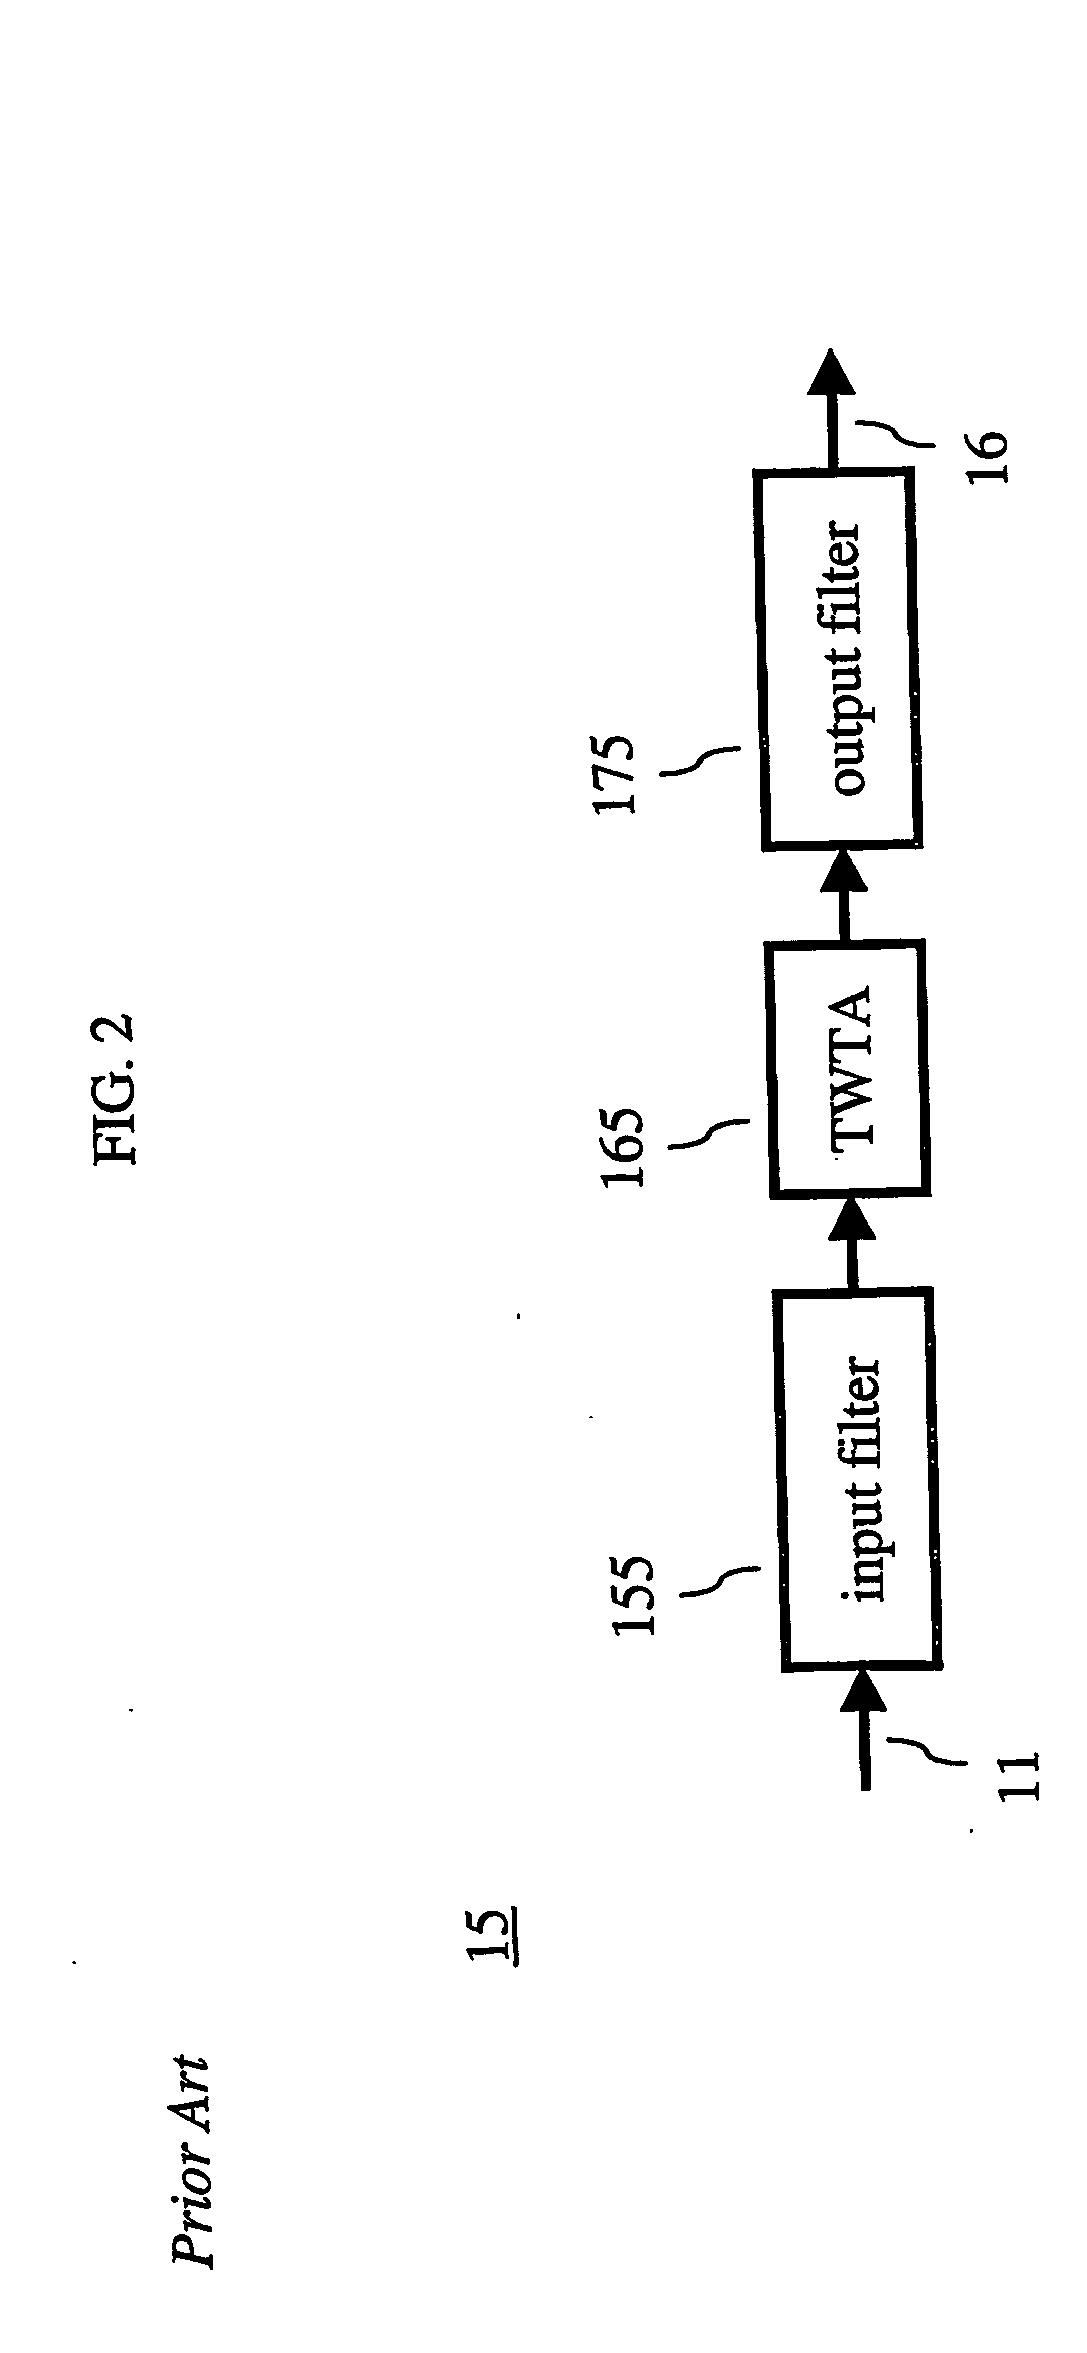 Apparatus and method for decoding in a hierarchical, modulation system